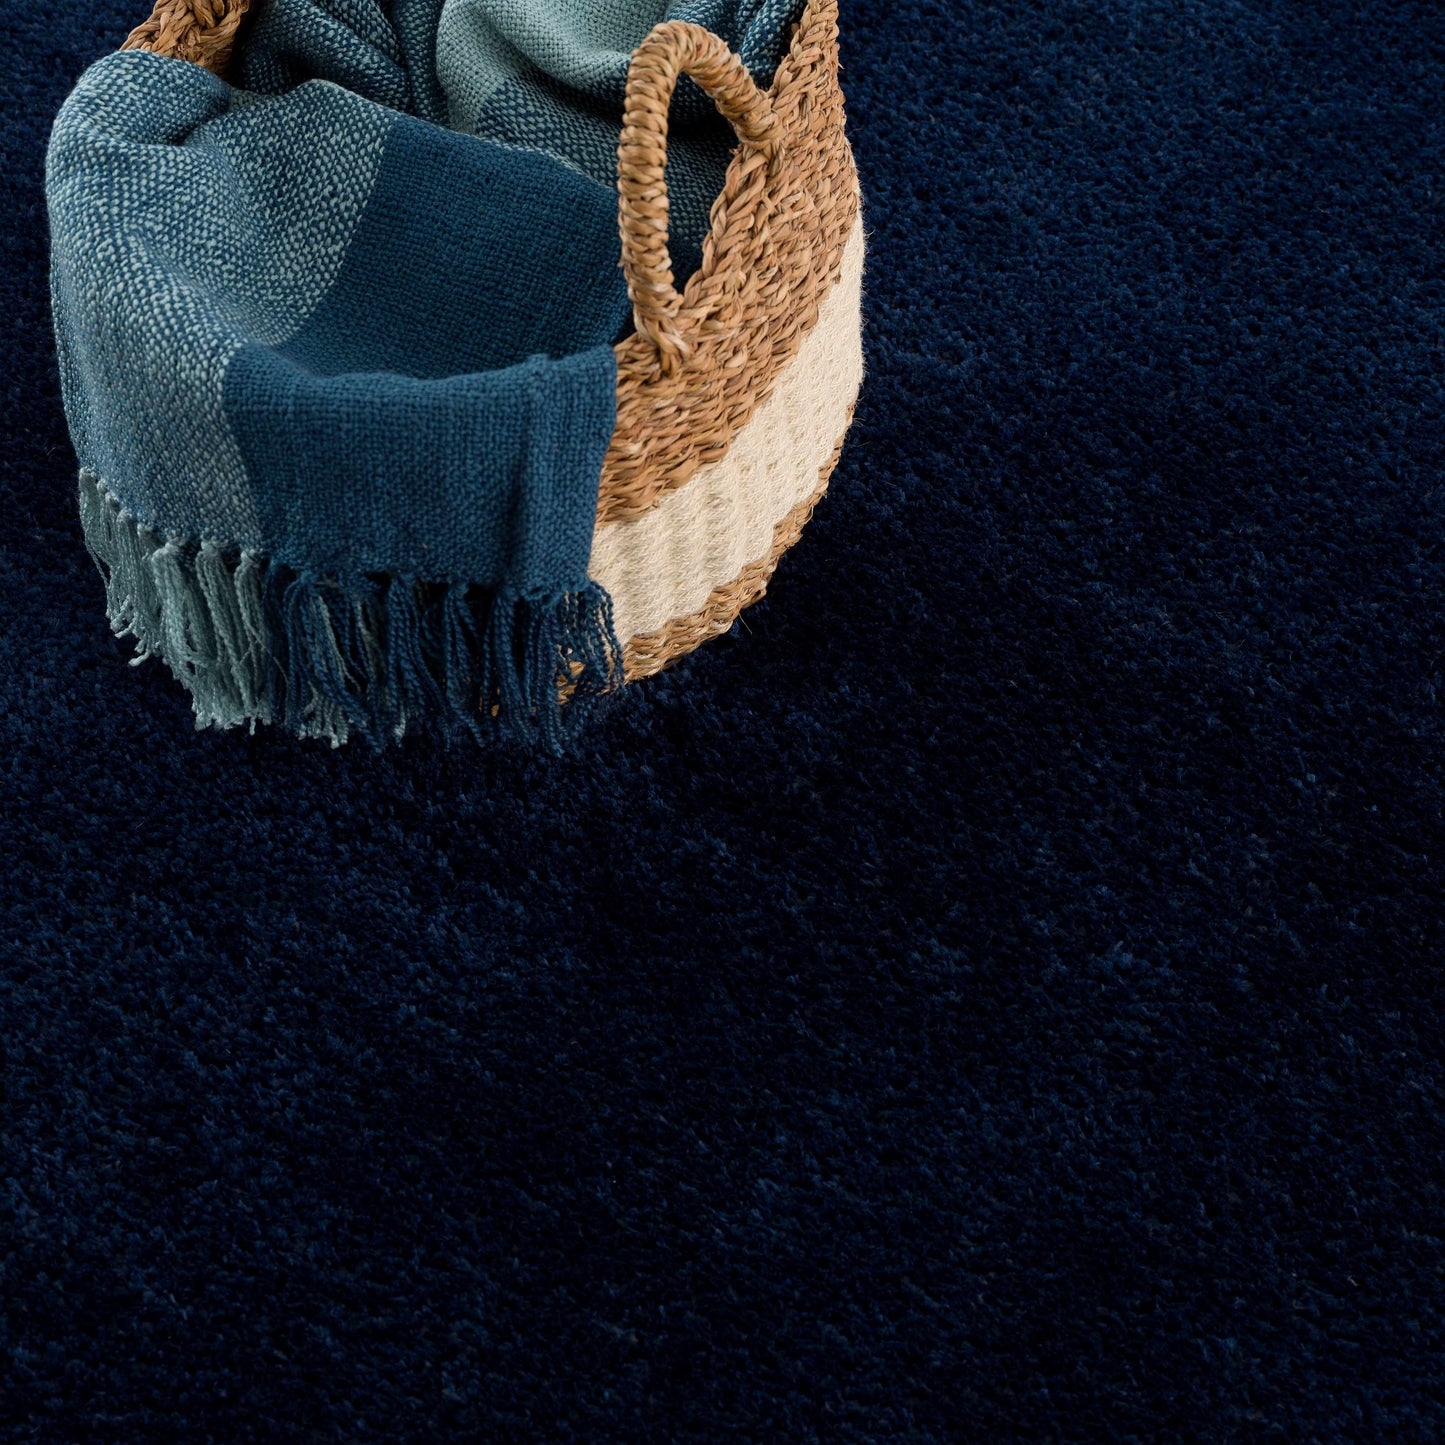 Boutique Rugs Rugs Heavenly Solid Navy Plush Rug